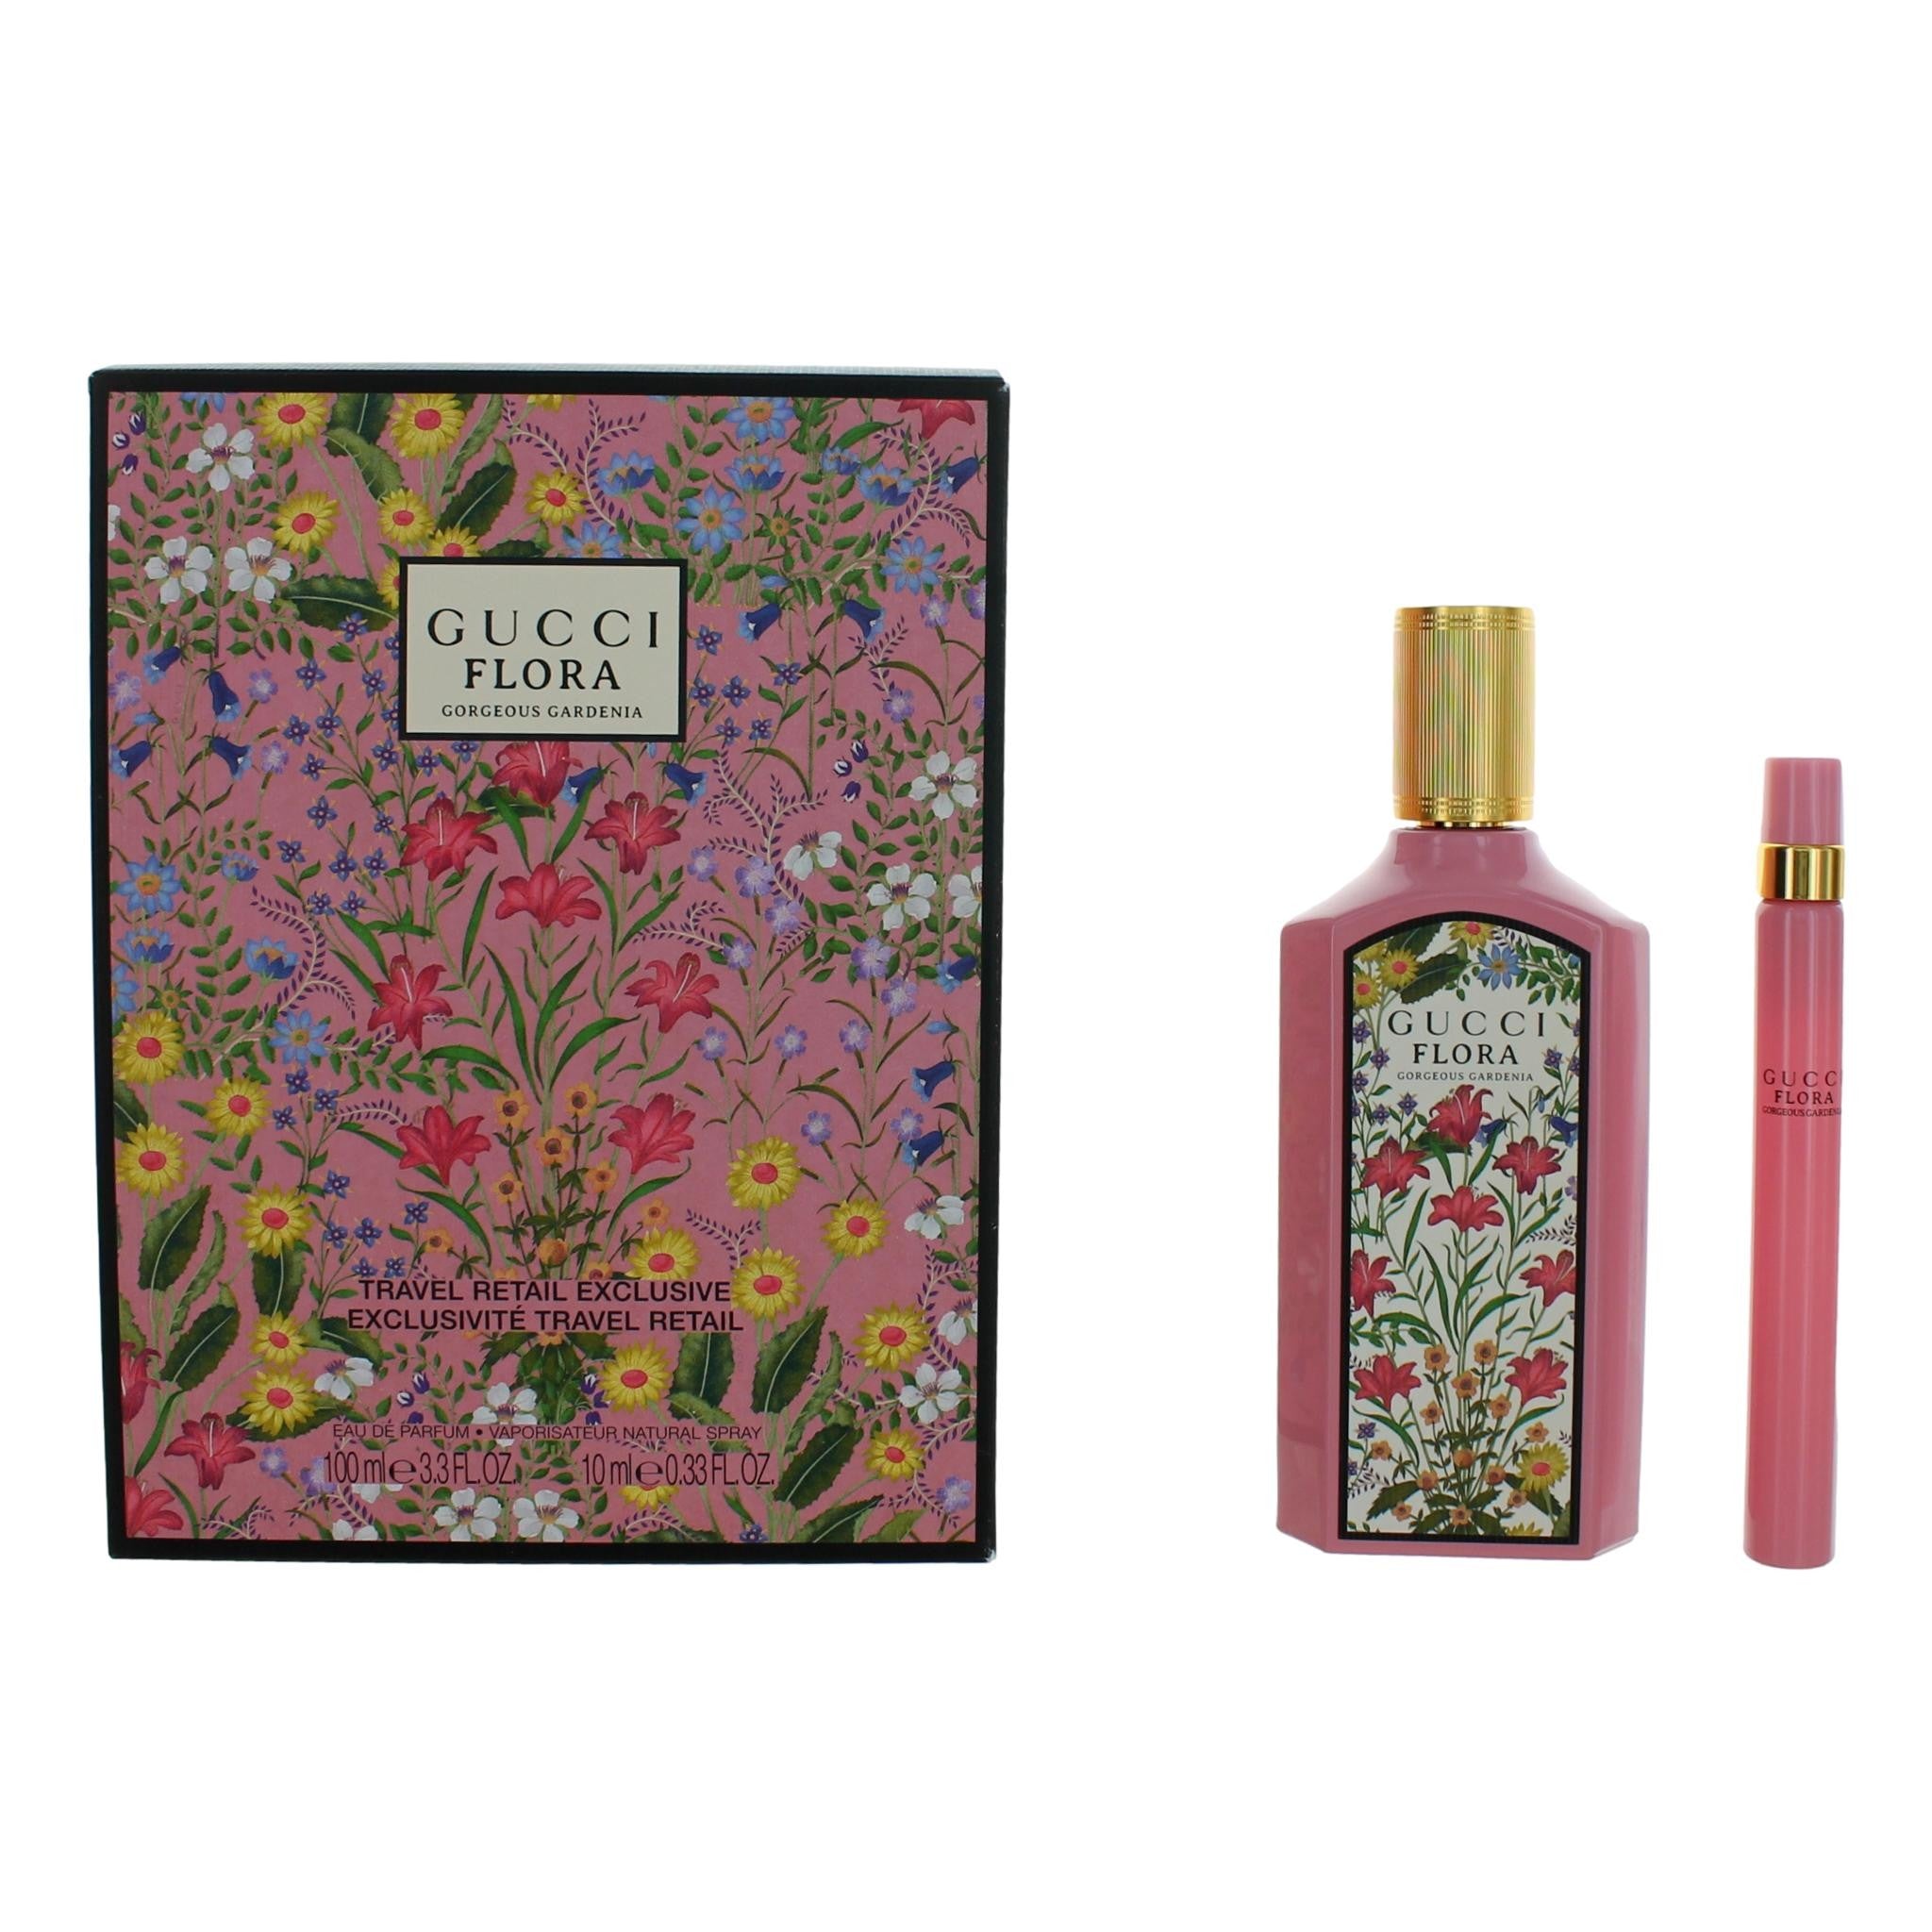 Bottle of Flora Gorgeous Gardenia by Gucci, 2 Piece Gift Set for Women